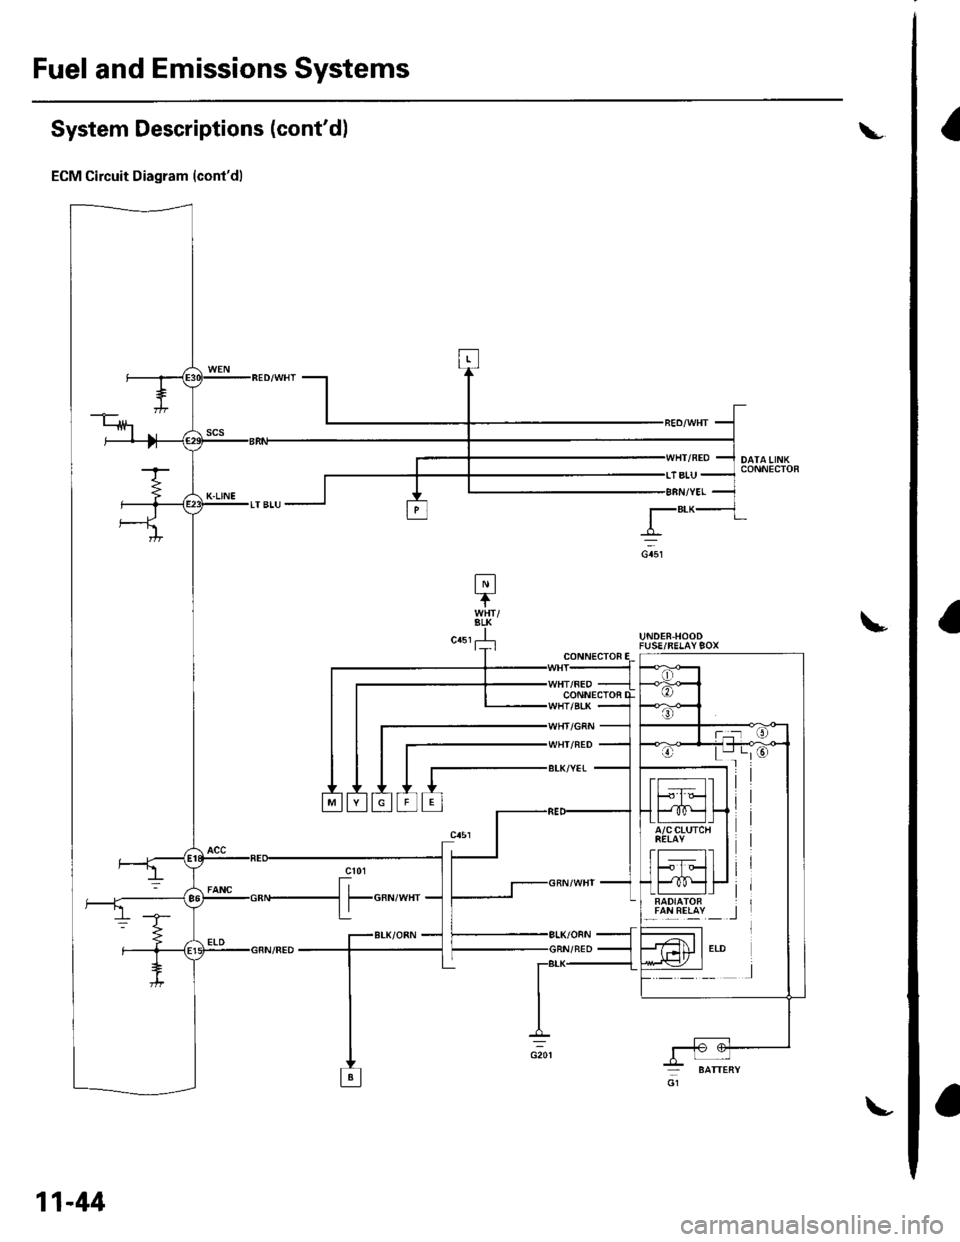 HONDA CIVIC 2003 7.G Owners Manual Fuel and Emissions Systems
a
System Descriptions (contdl
ECM Circuit Diagram (contd)
L
!UNDER.HOODFUSE/RELAY9OX
lalLREllY _ _l
CONN€CTOF
CONNECTOi
WHI/NED
BLK/YET
11-44 